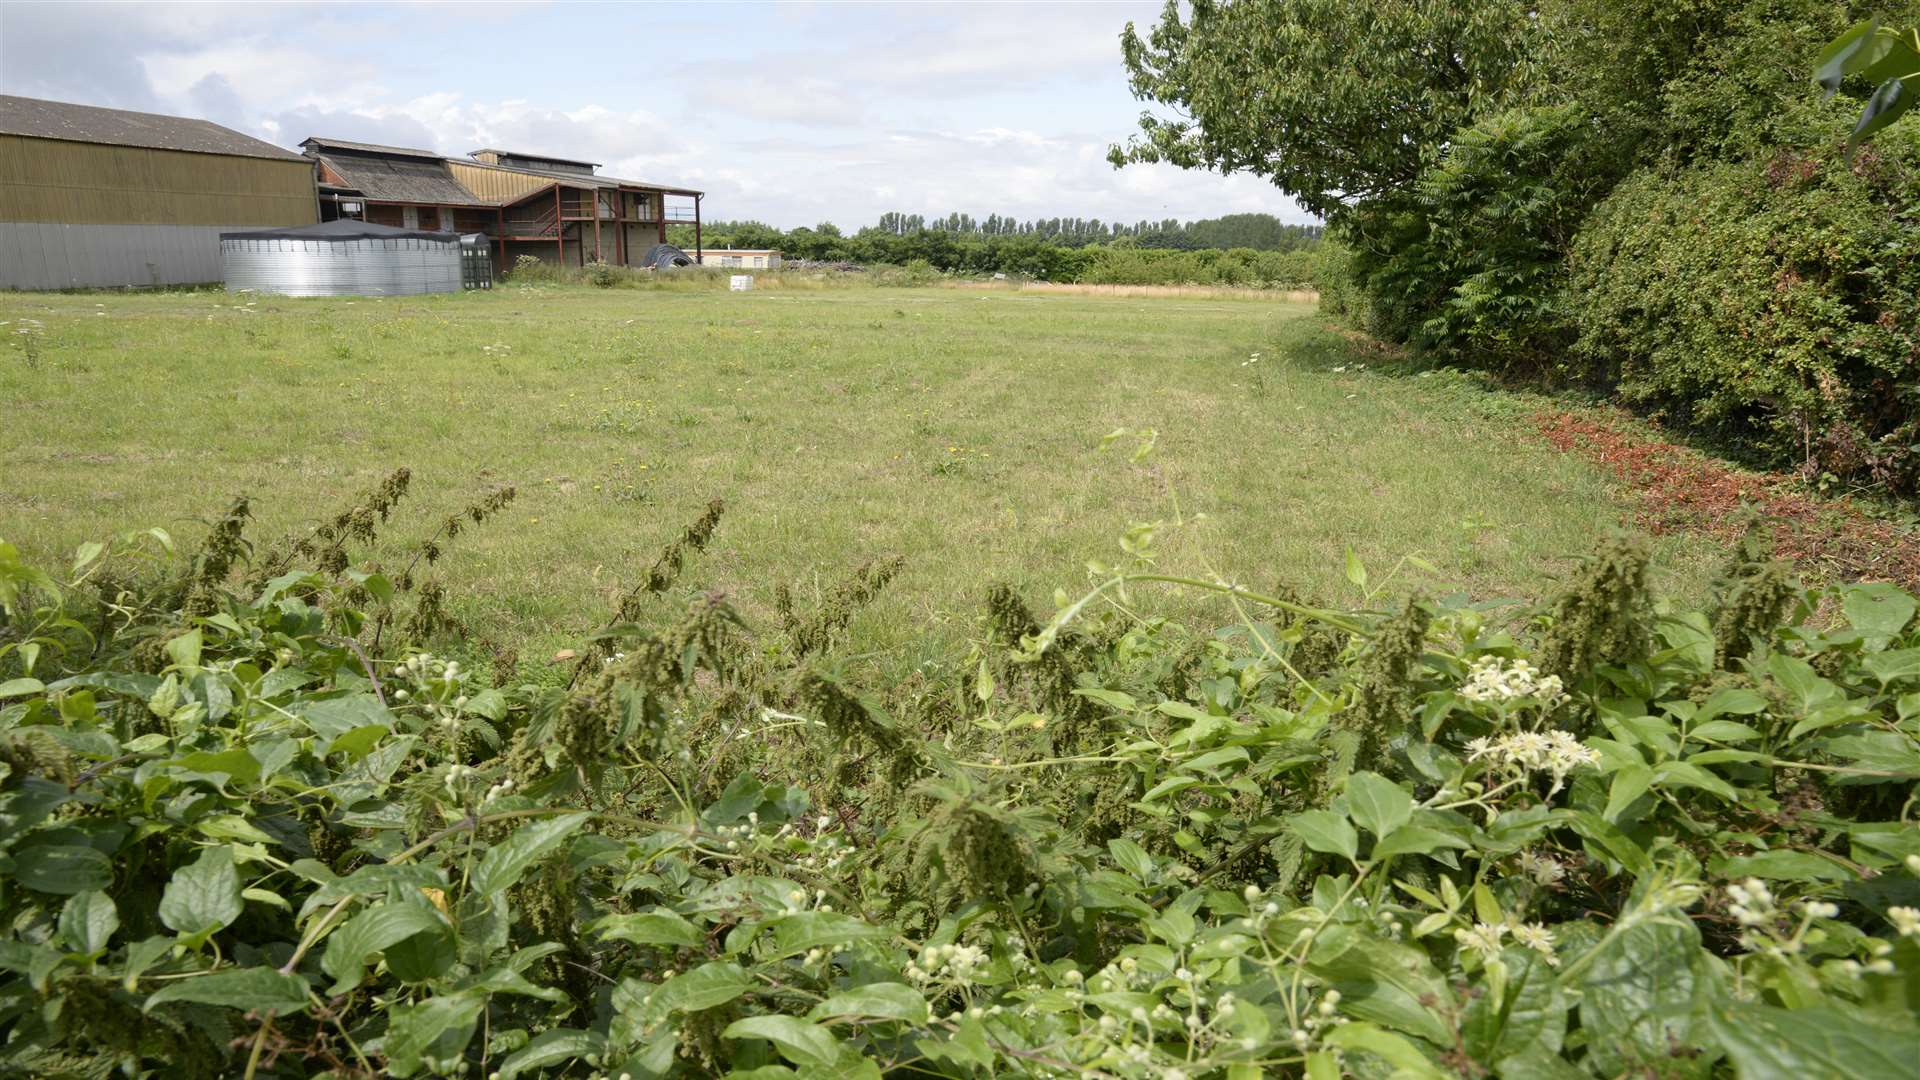 The site for a proposed cold store at Owens Court Farm